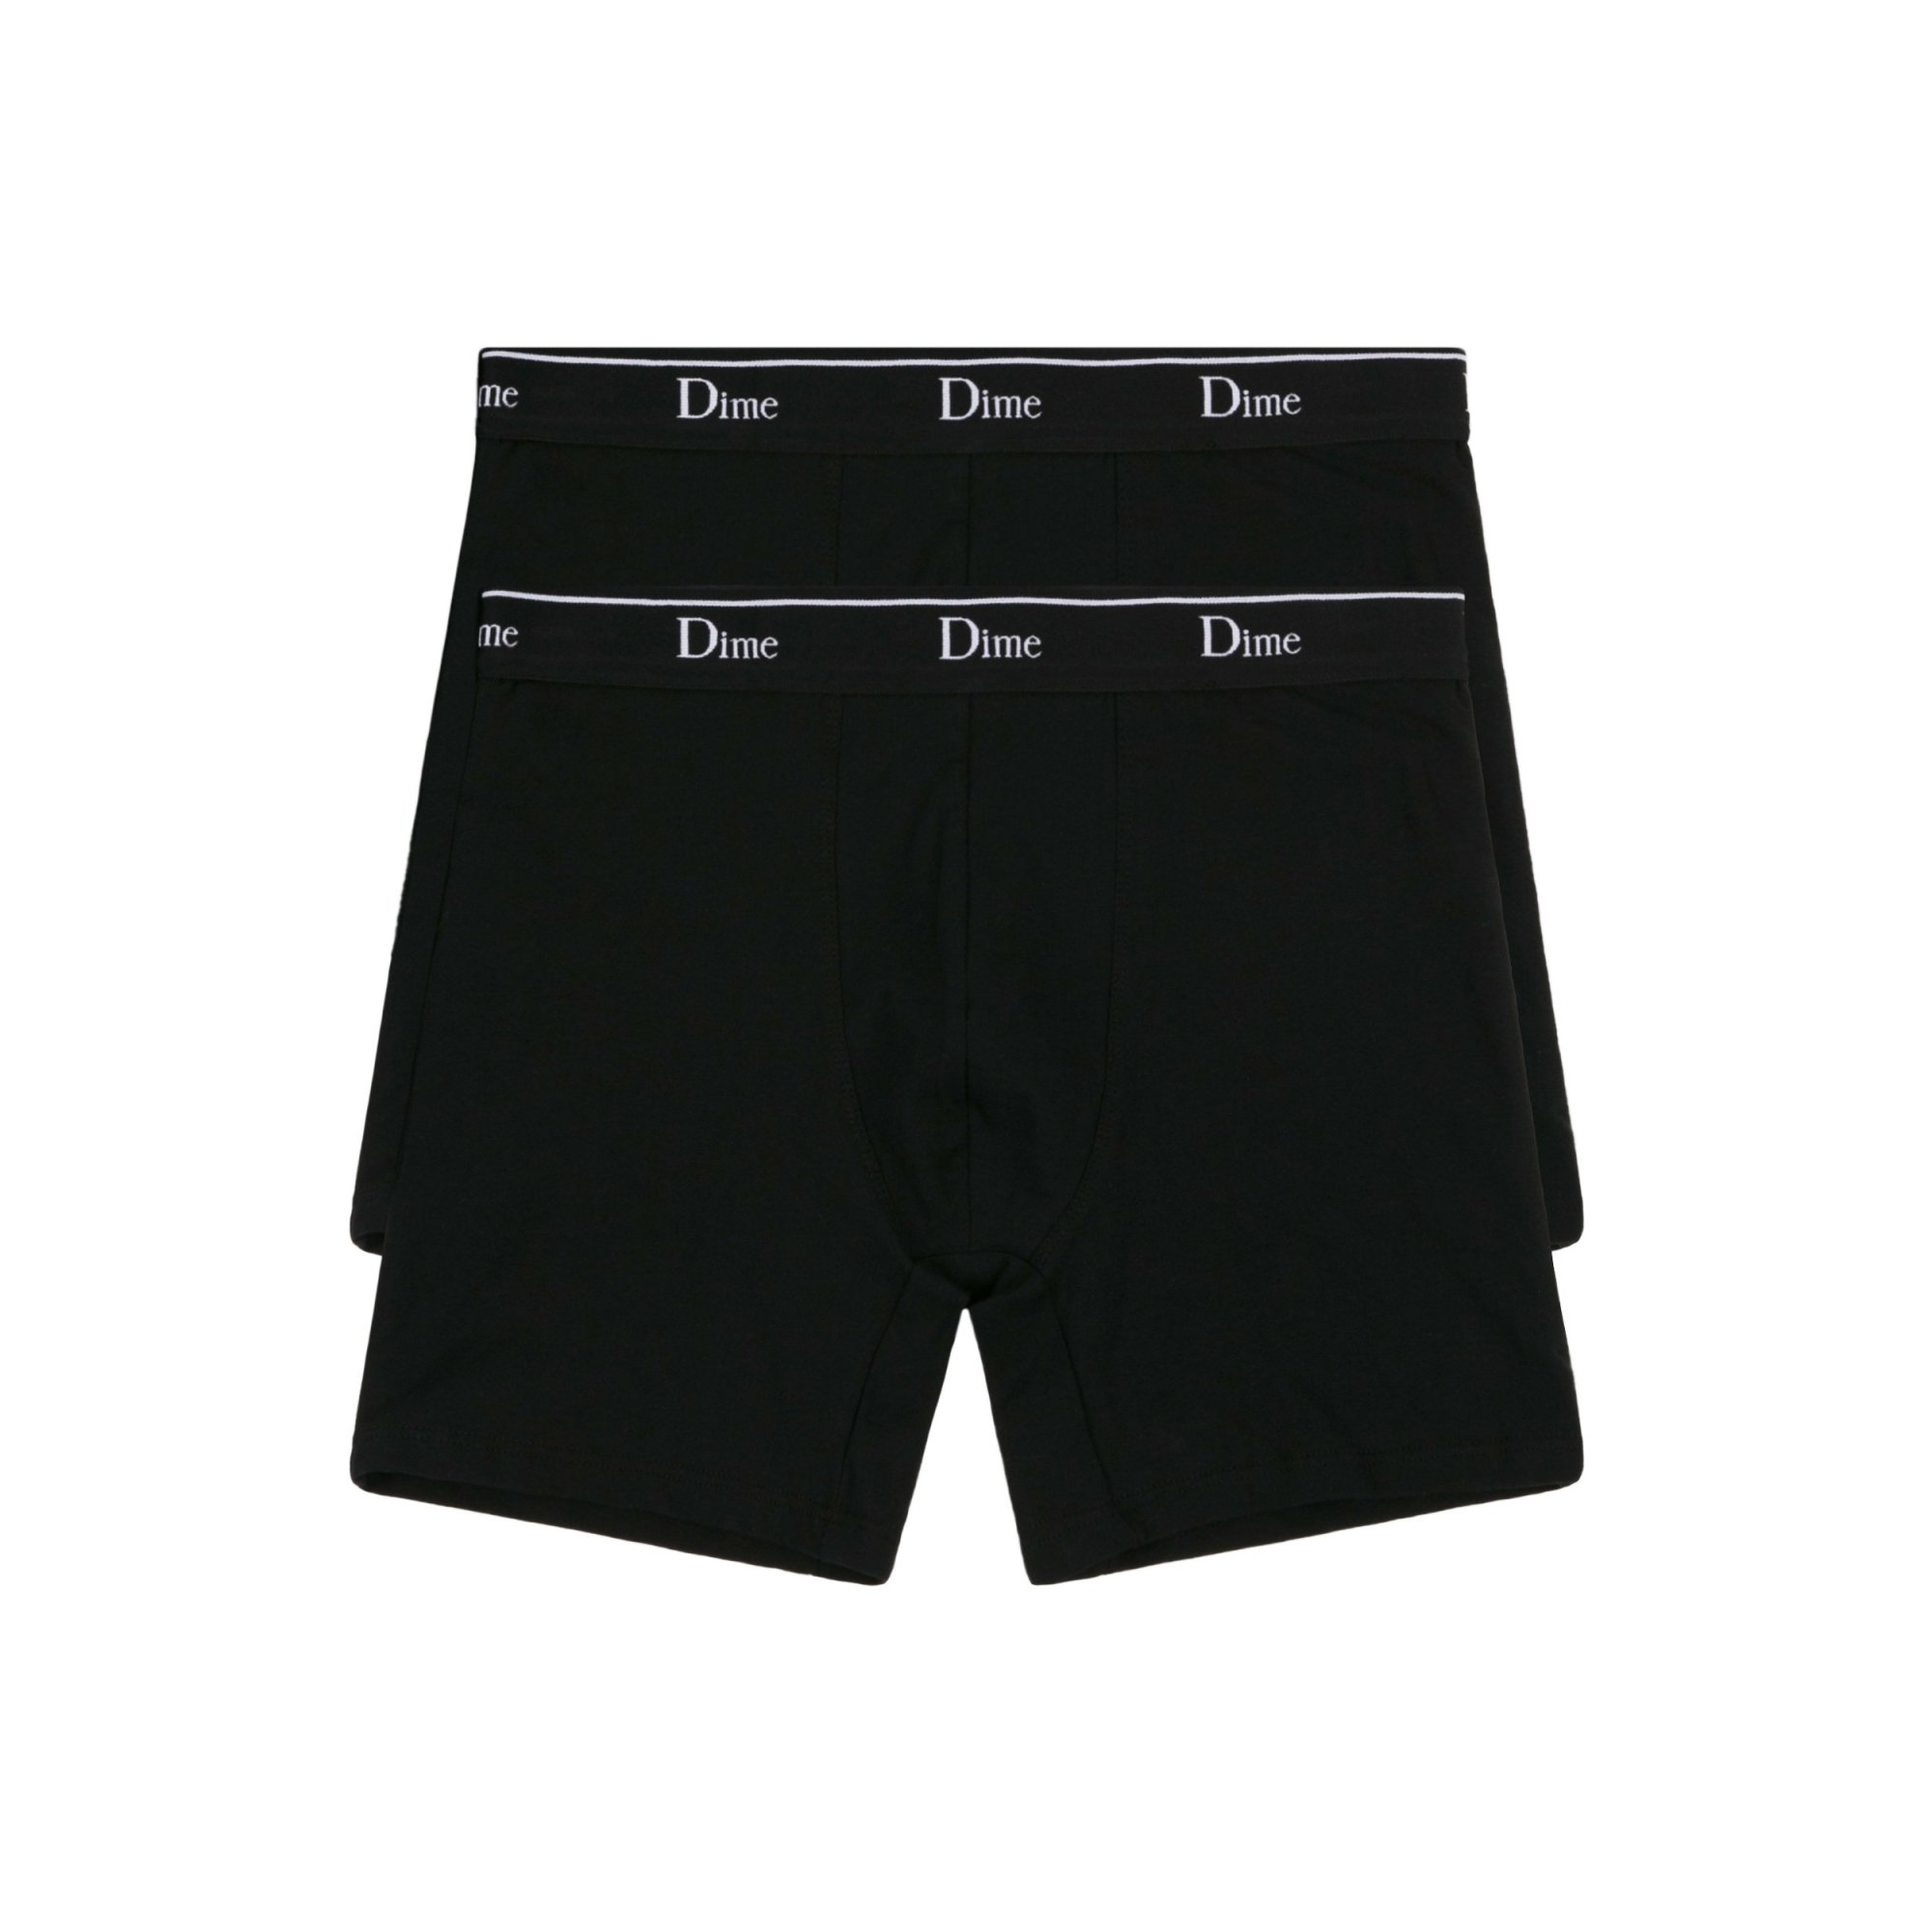 DIME<br>CLASSIC 2 PACK UNDERWEAR
<br>